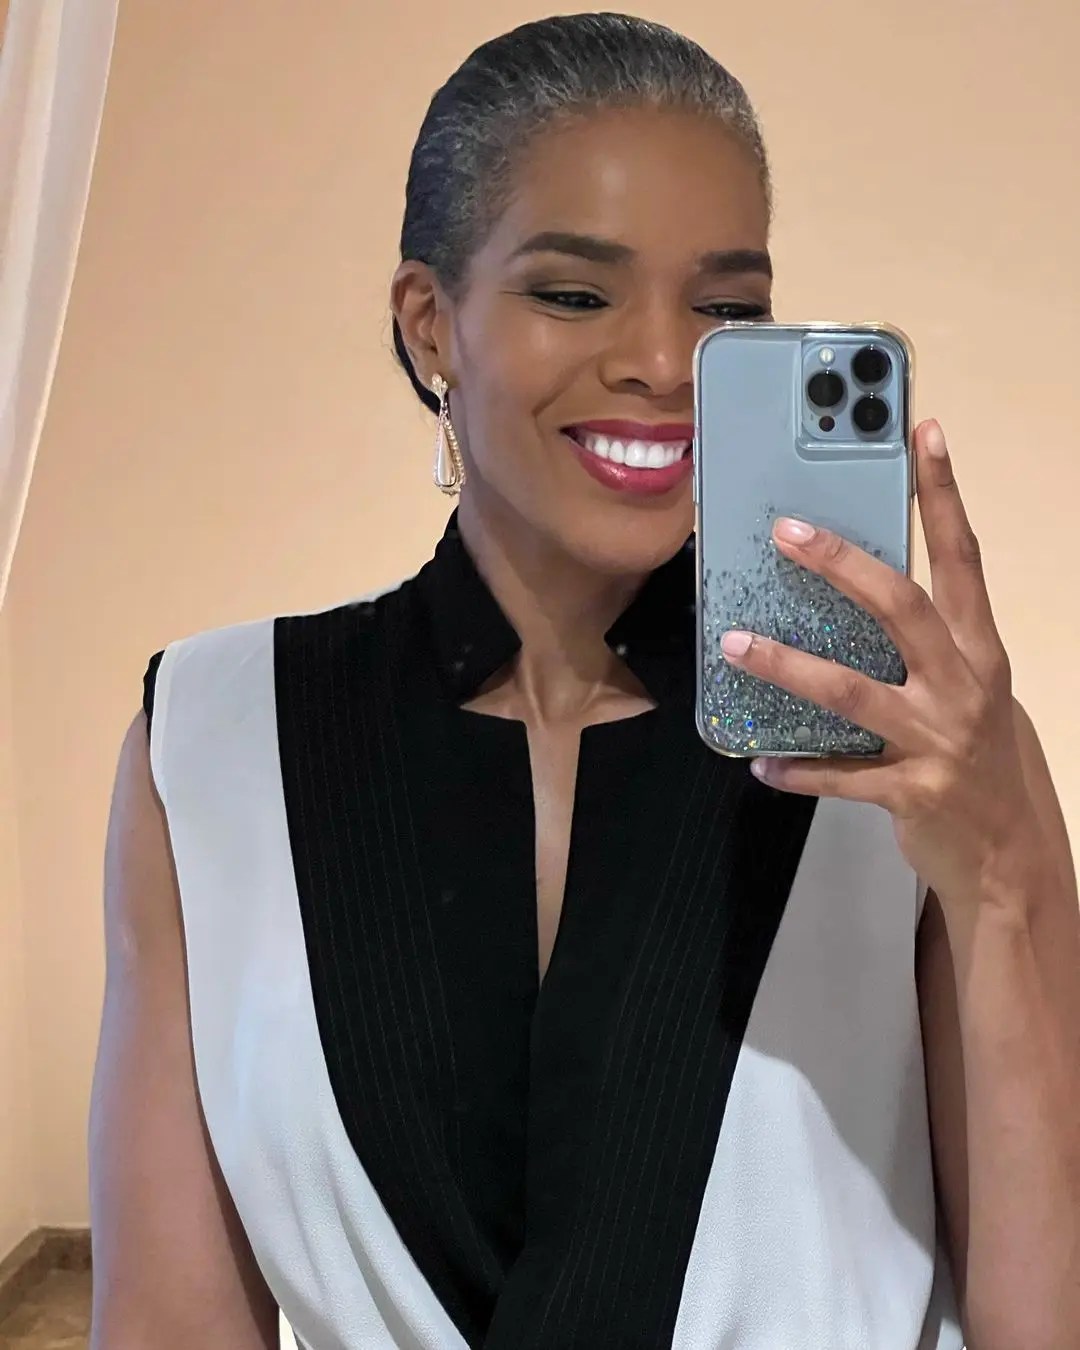 LOOK: 51-year-old Connie Ferguson shows off her abs